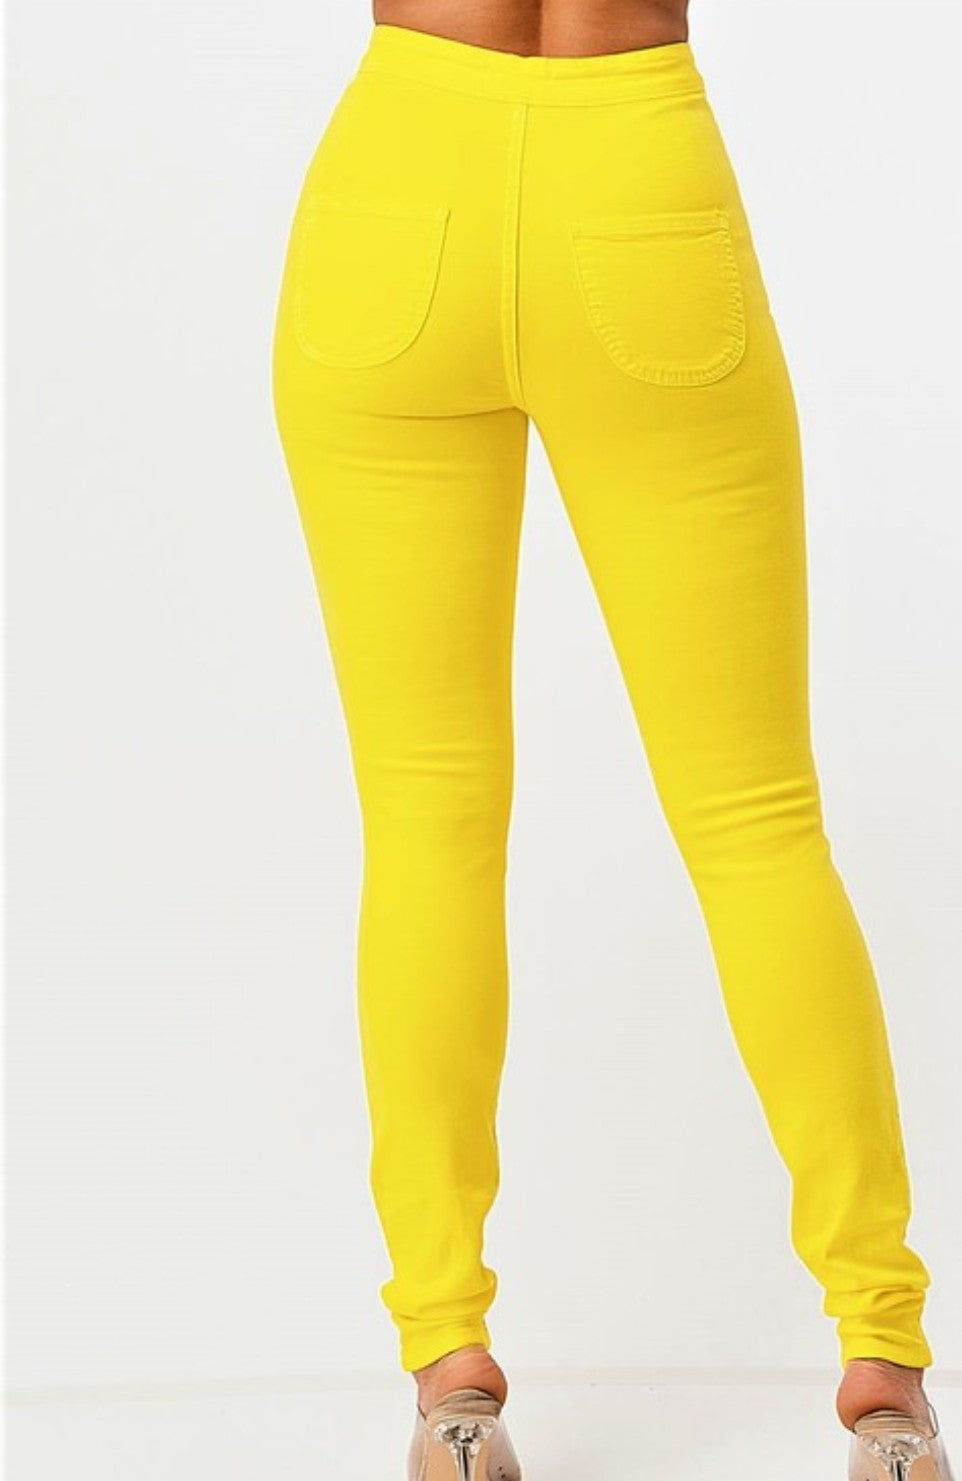 $15.99 Super Swank High Waist Stretchy Jeans - Yellow